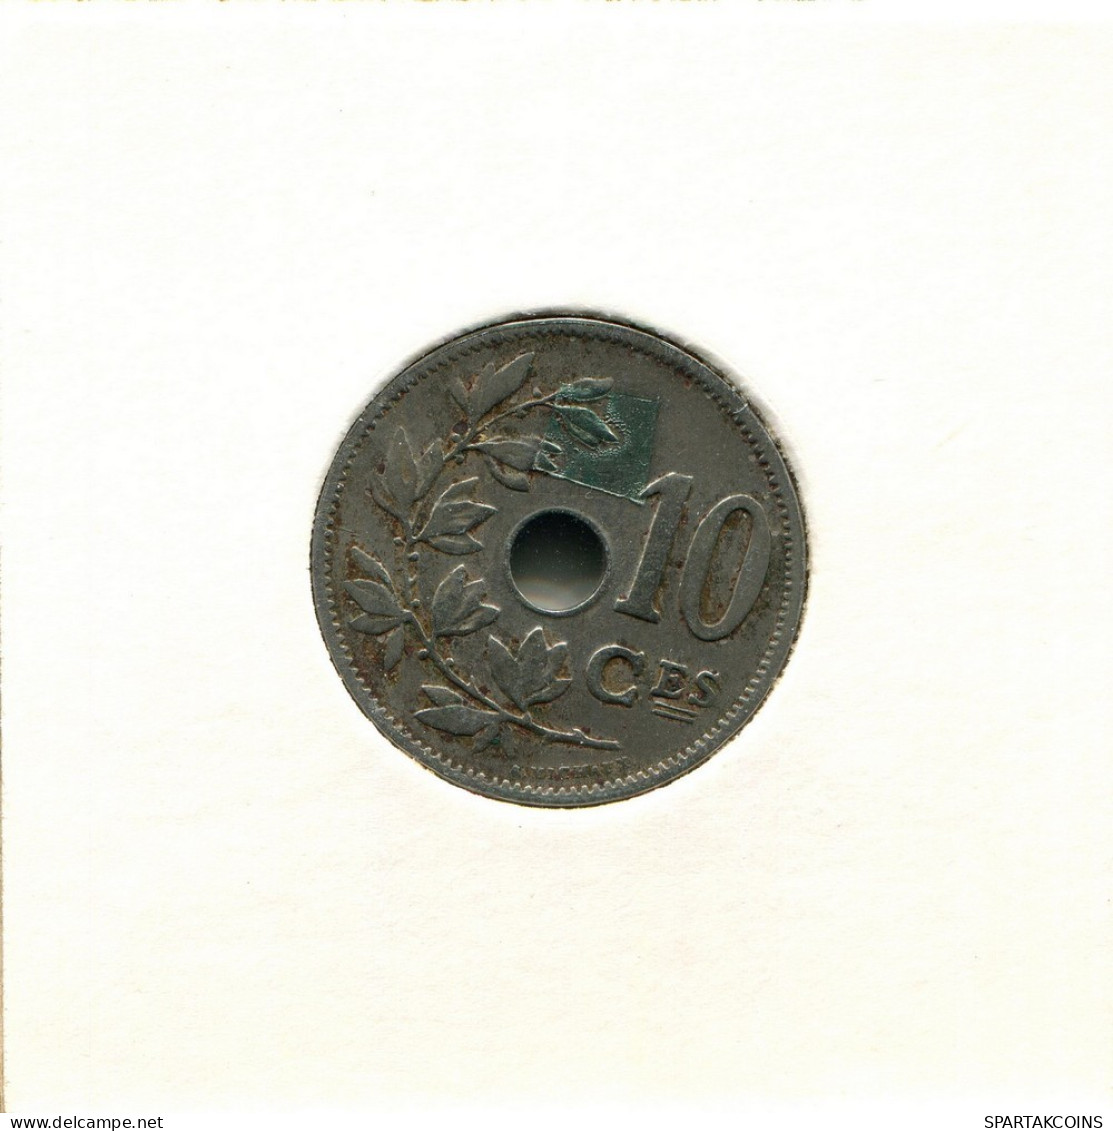 10 CENTIMES 1902 FRENCH Text BELGIUM Coin #BB259.U.A - 10 Centimes